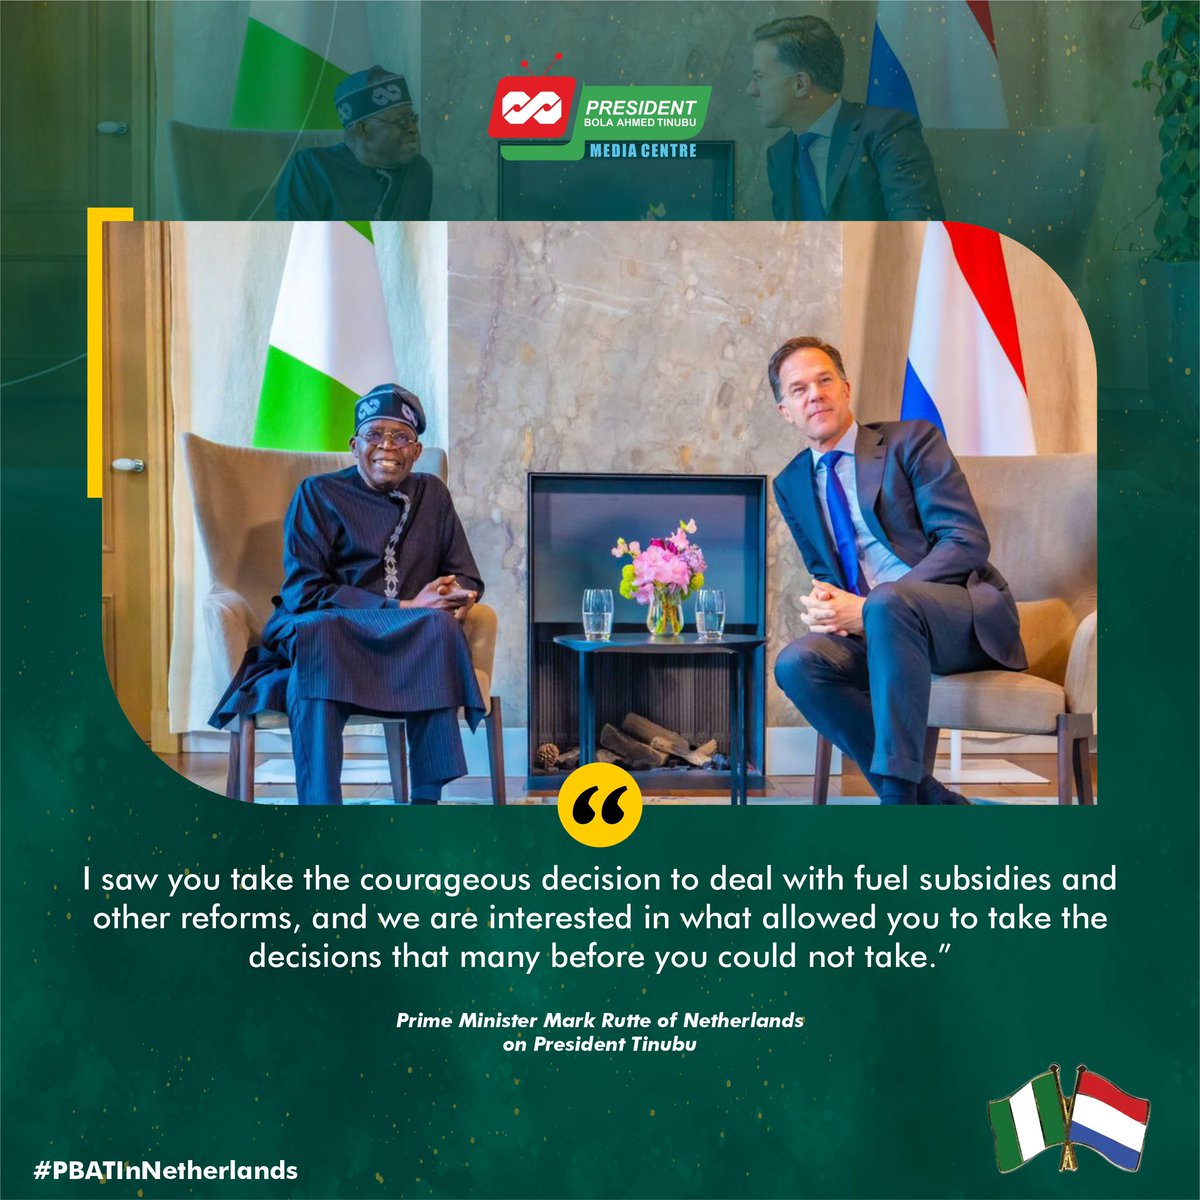 Prime Minister Mark Rutte was full of praise for President Tinubu’s resilience and determination to take hard decisions that his predecessors found hard to take.

#PBATInNetherlands